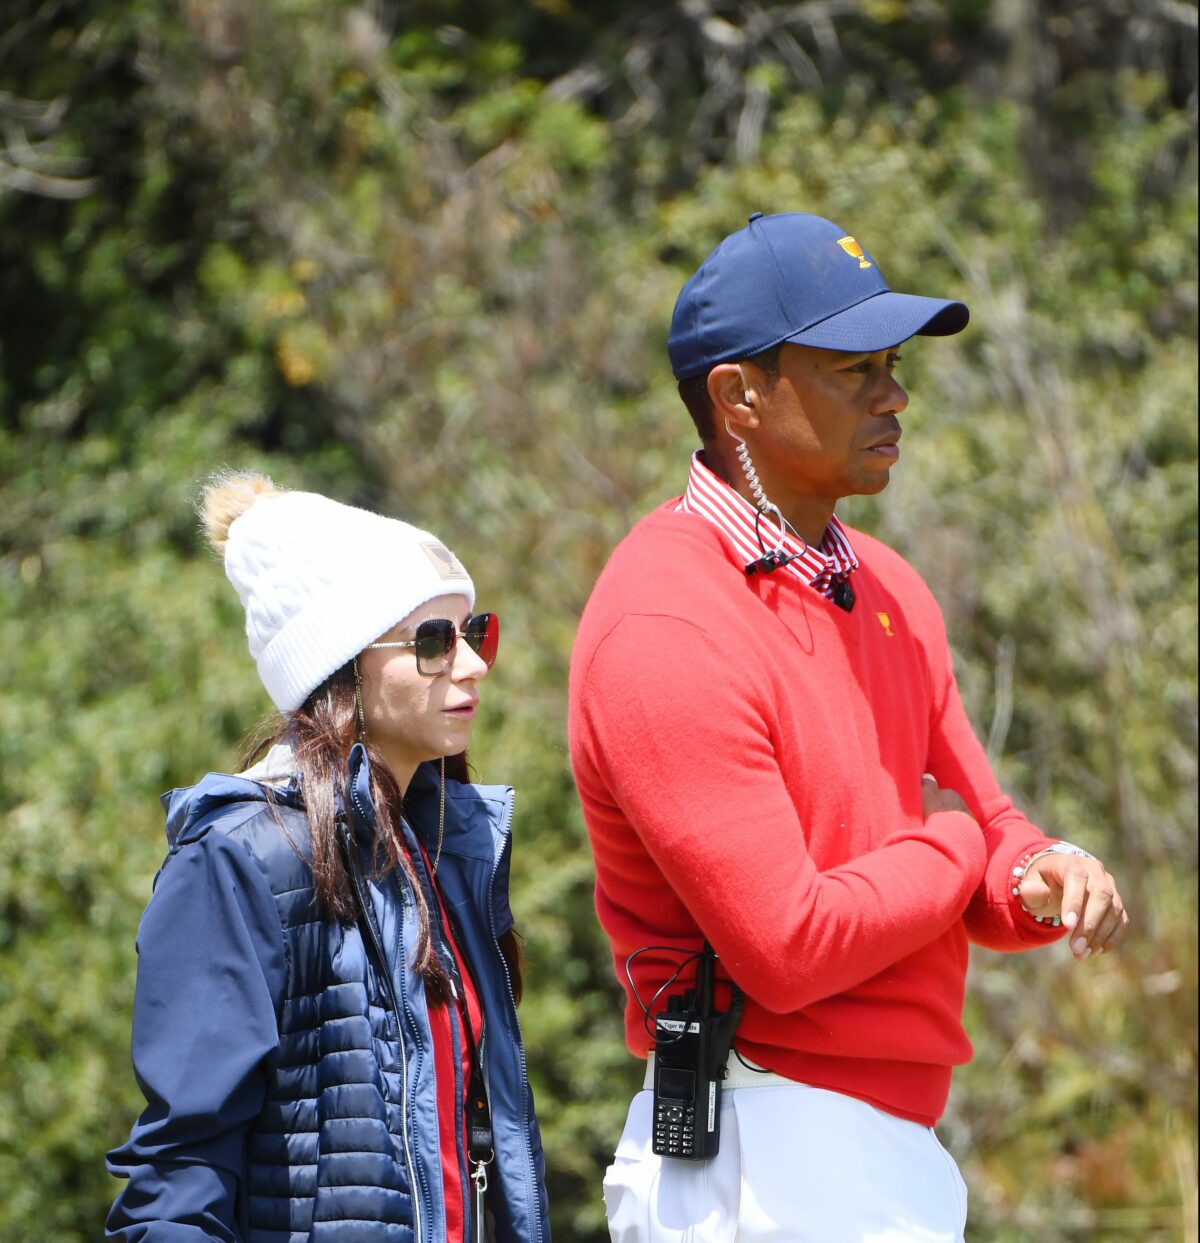 Tiger Woods’ ex-girlfriend is dropping her $30 million lawsuit, per report